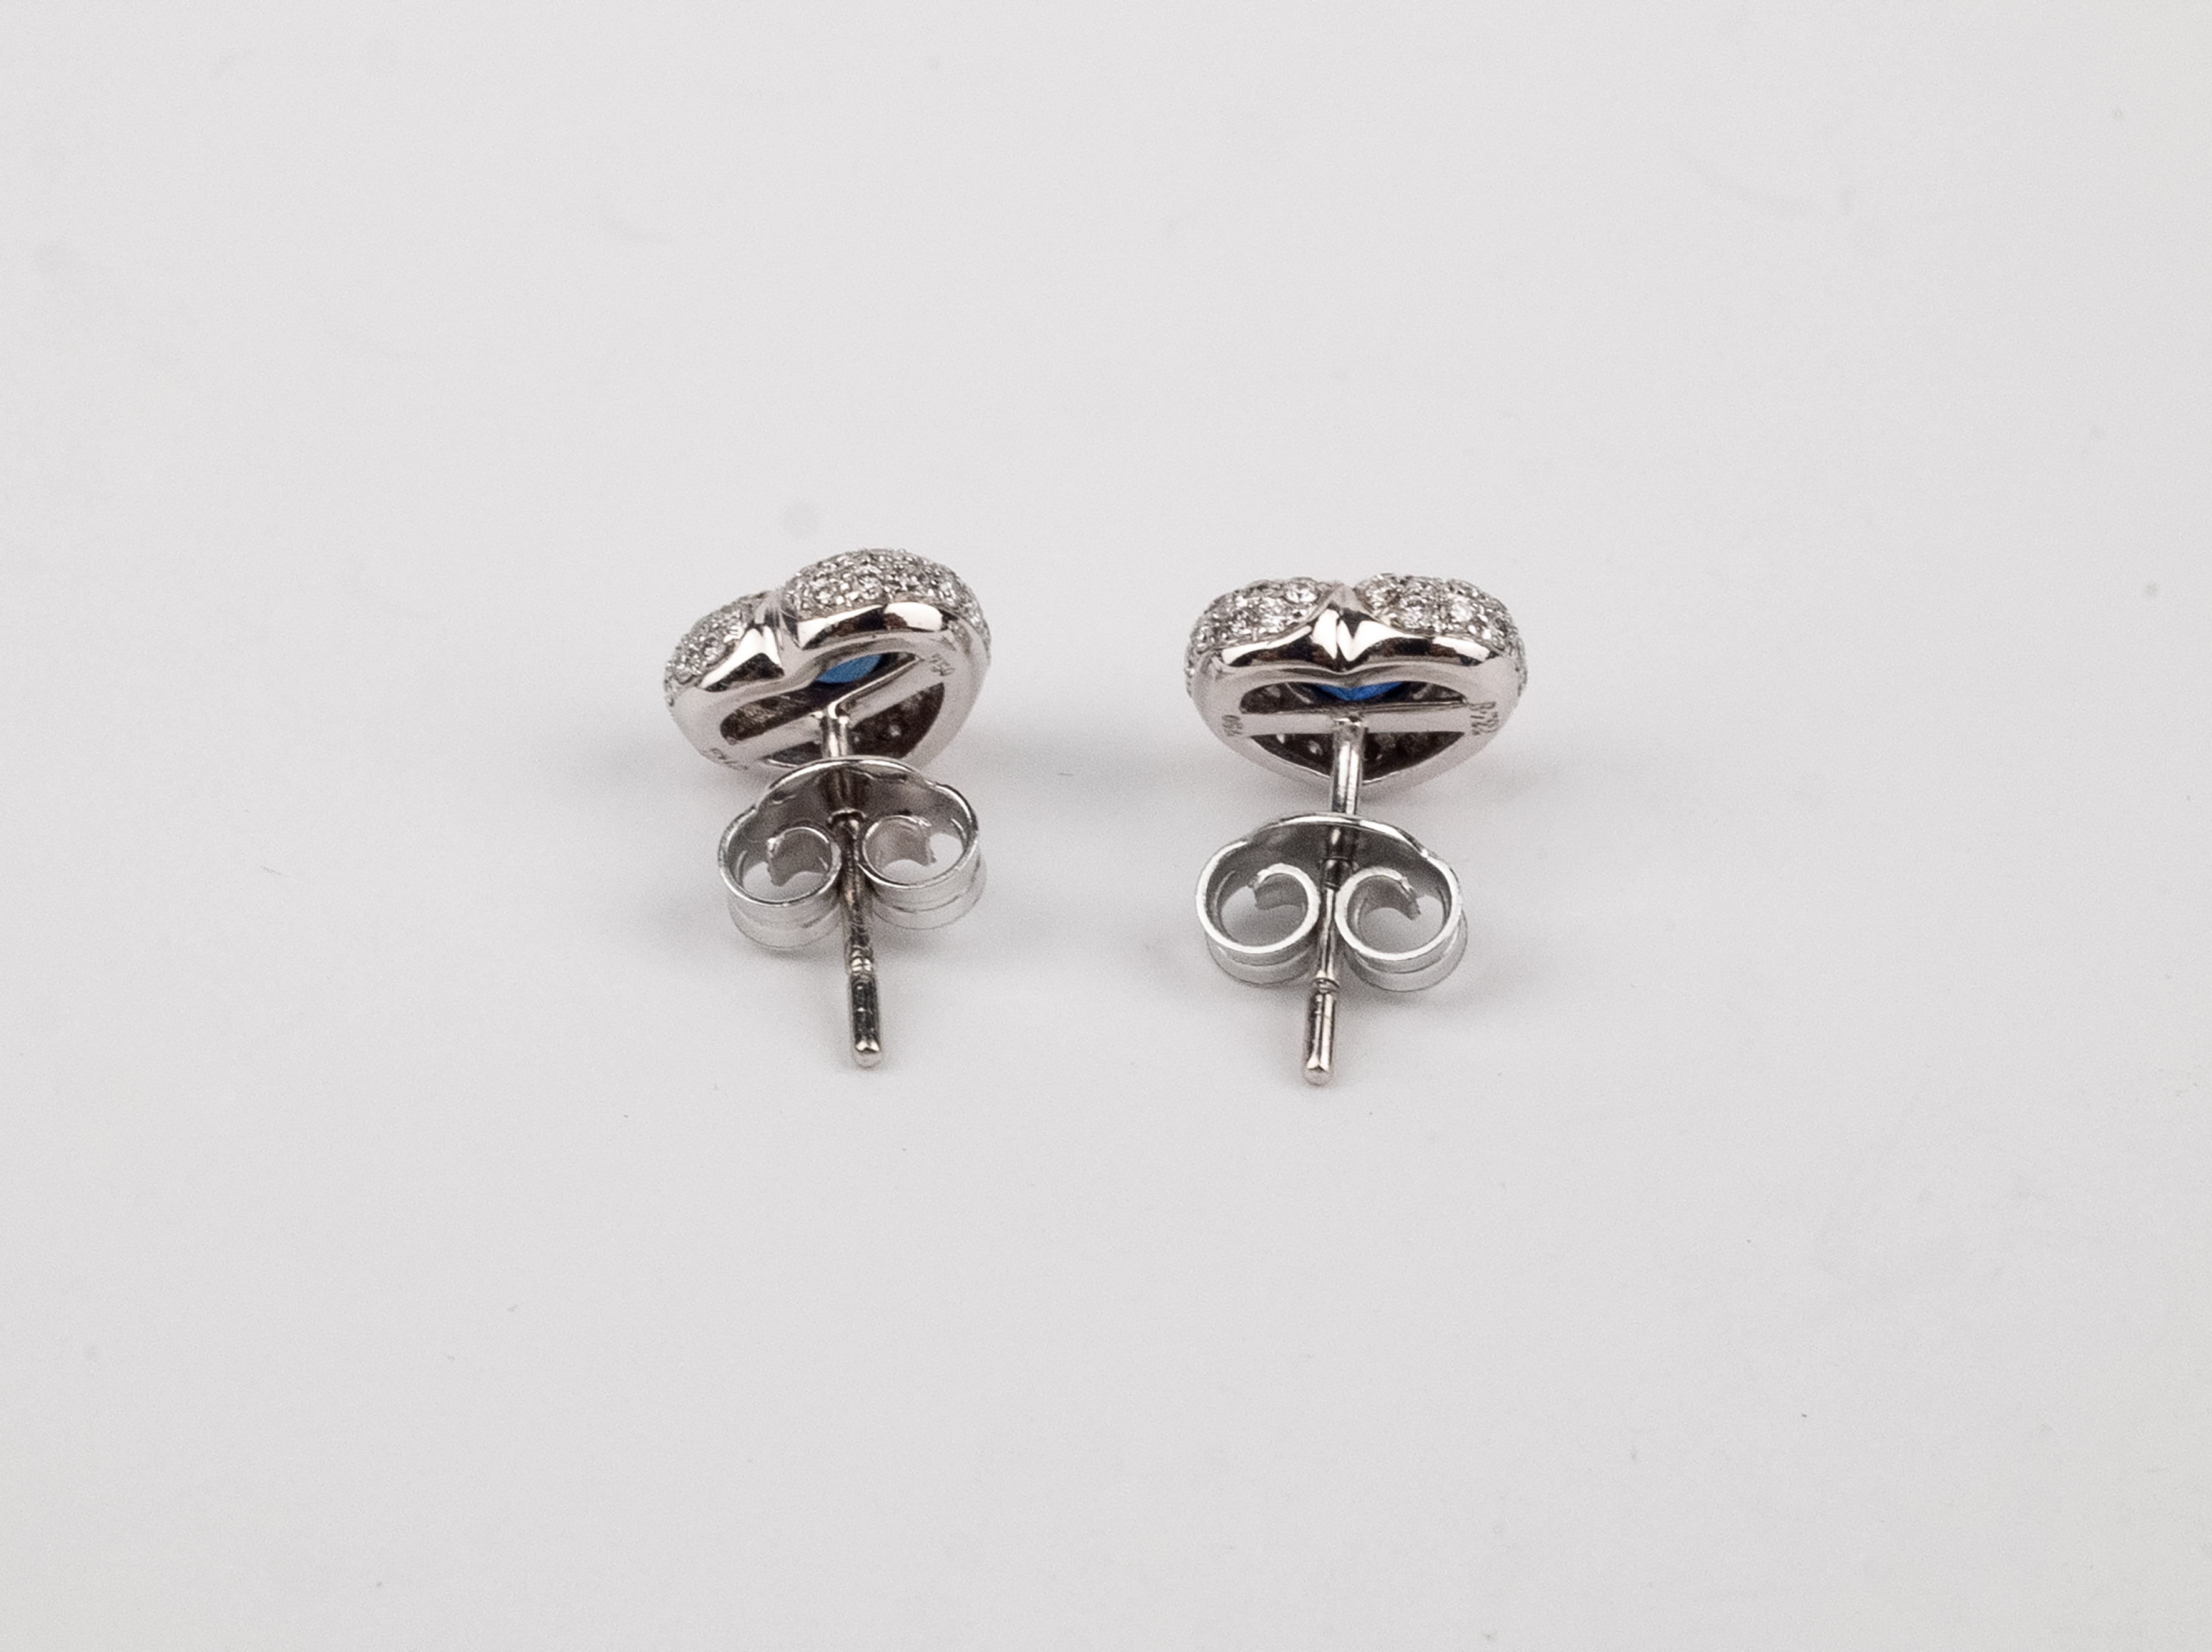 A pair of heart shaped stud earrings - Image 2 of 2